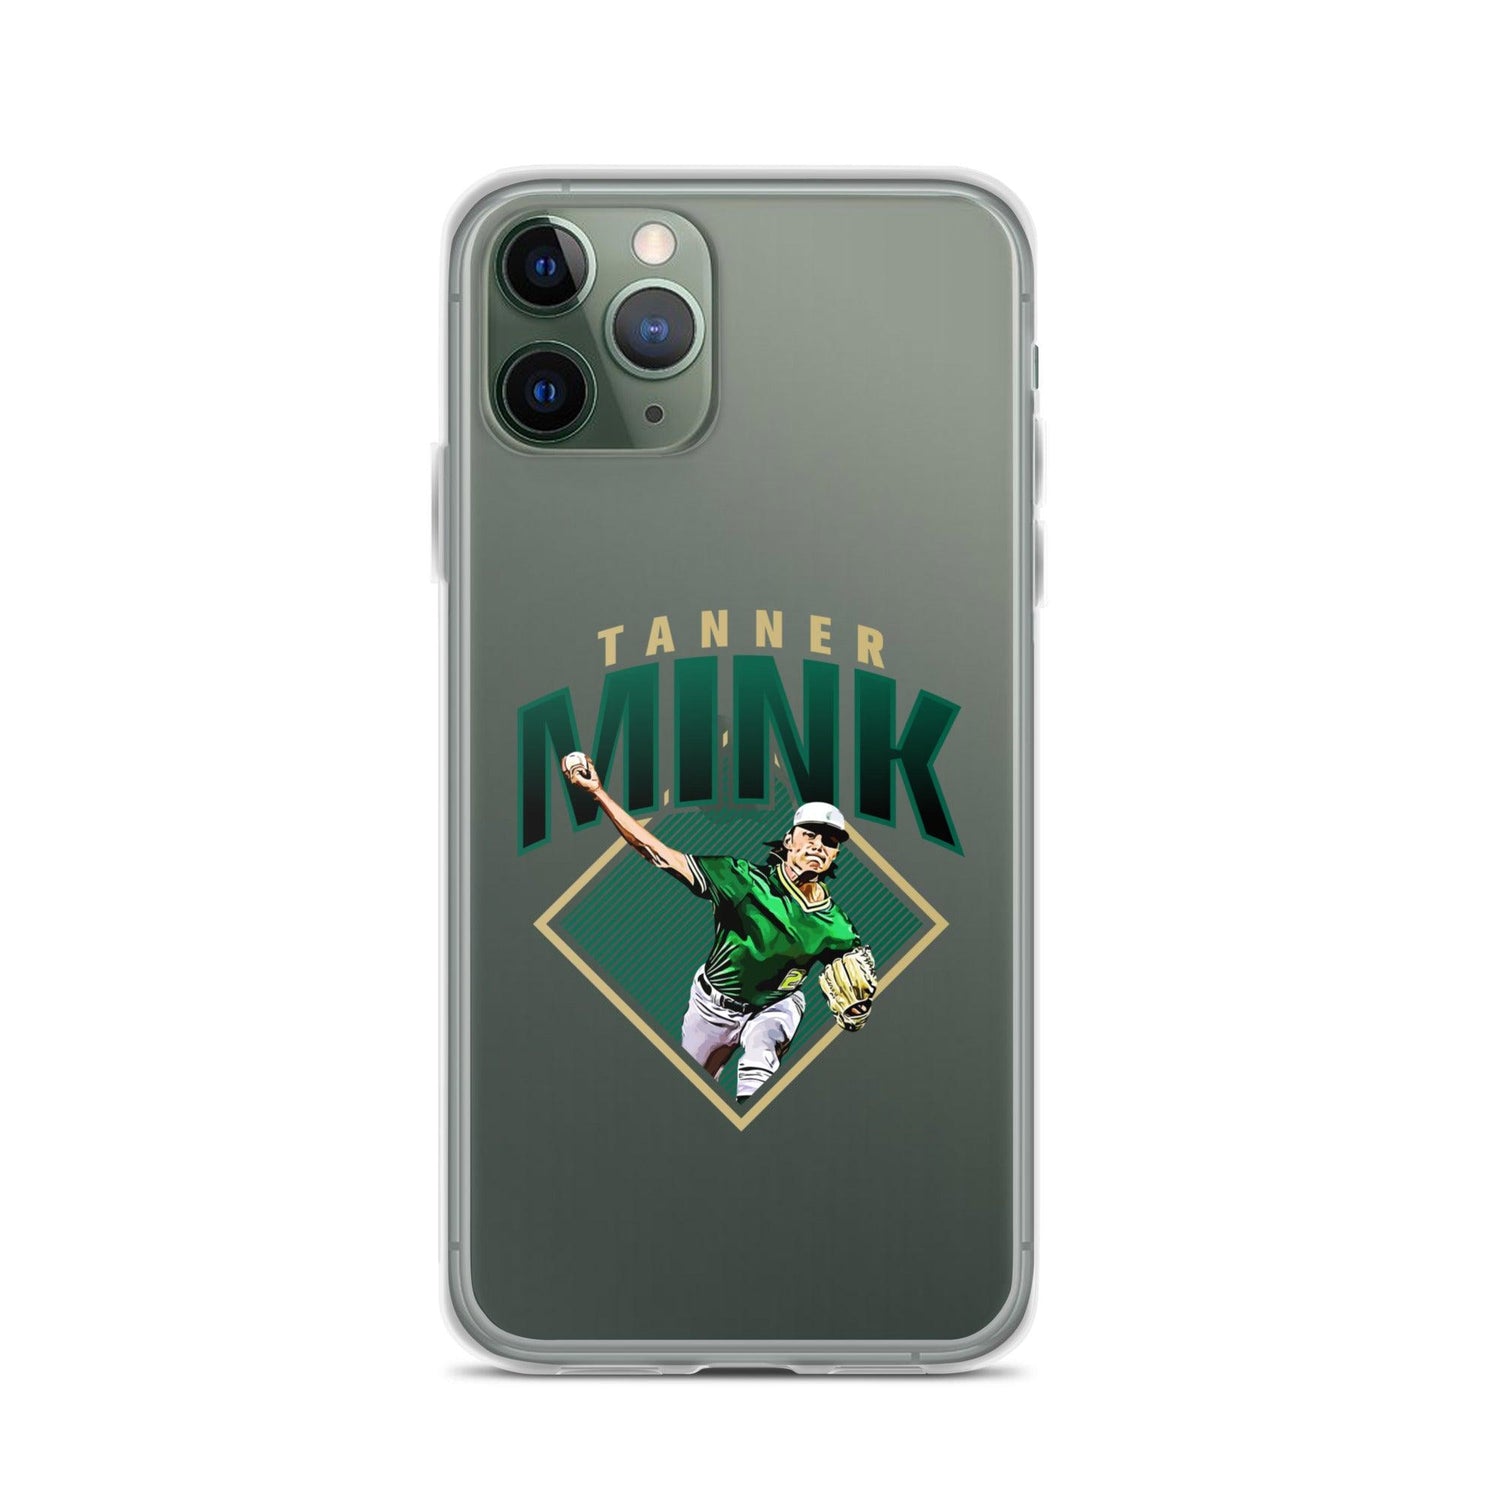 Tanner Mink "Gameday" iPhone Case - Fan Arch